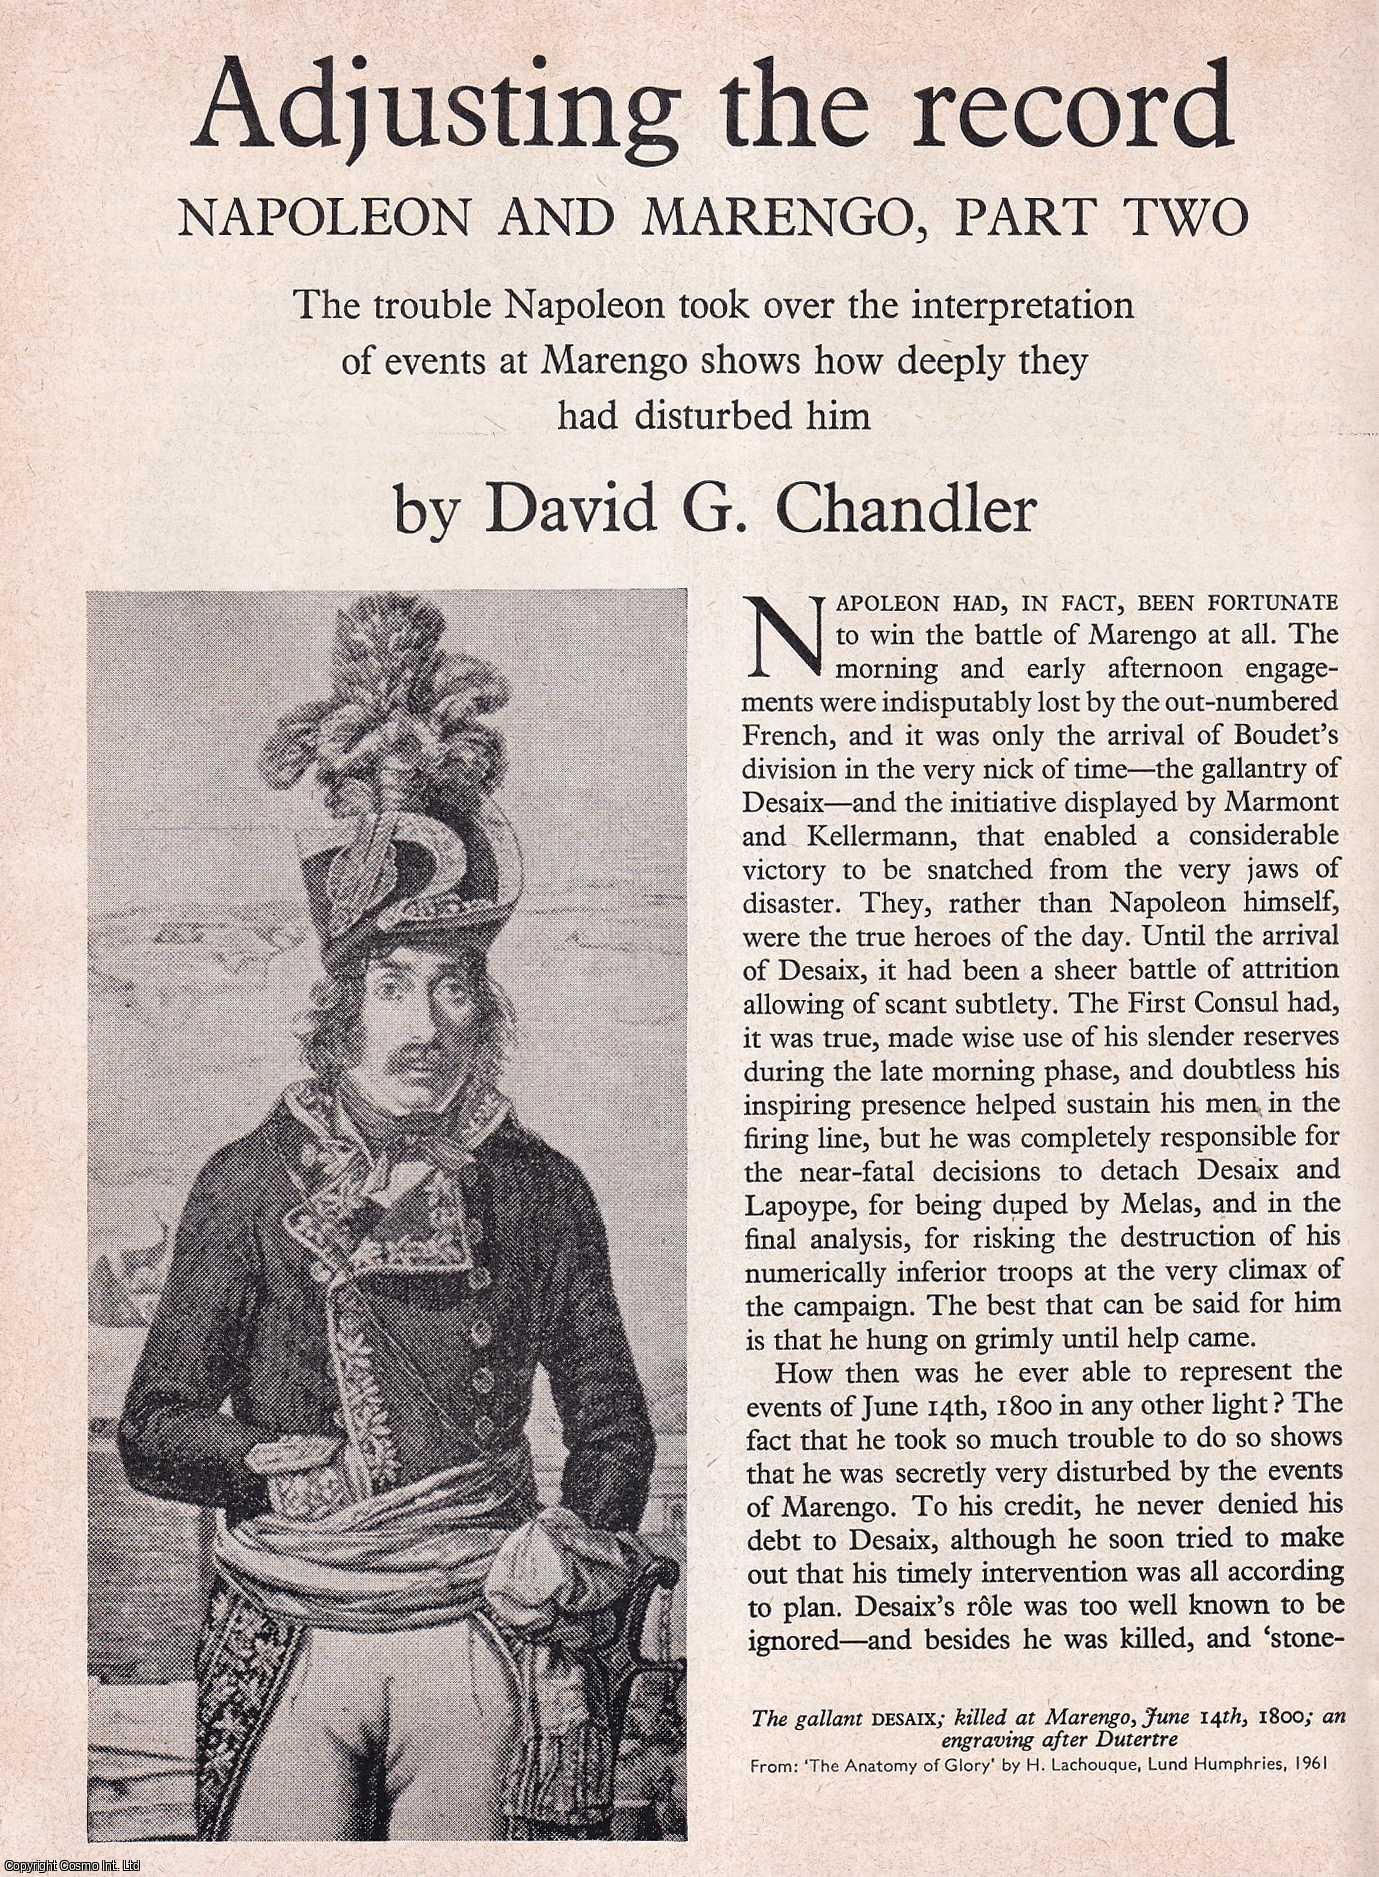 David G. Chandler - Adjusting The Record: Napoleon and Marengo. Part 2. An original article from History Today magazine, 1967.